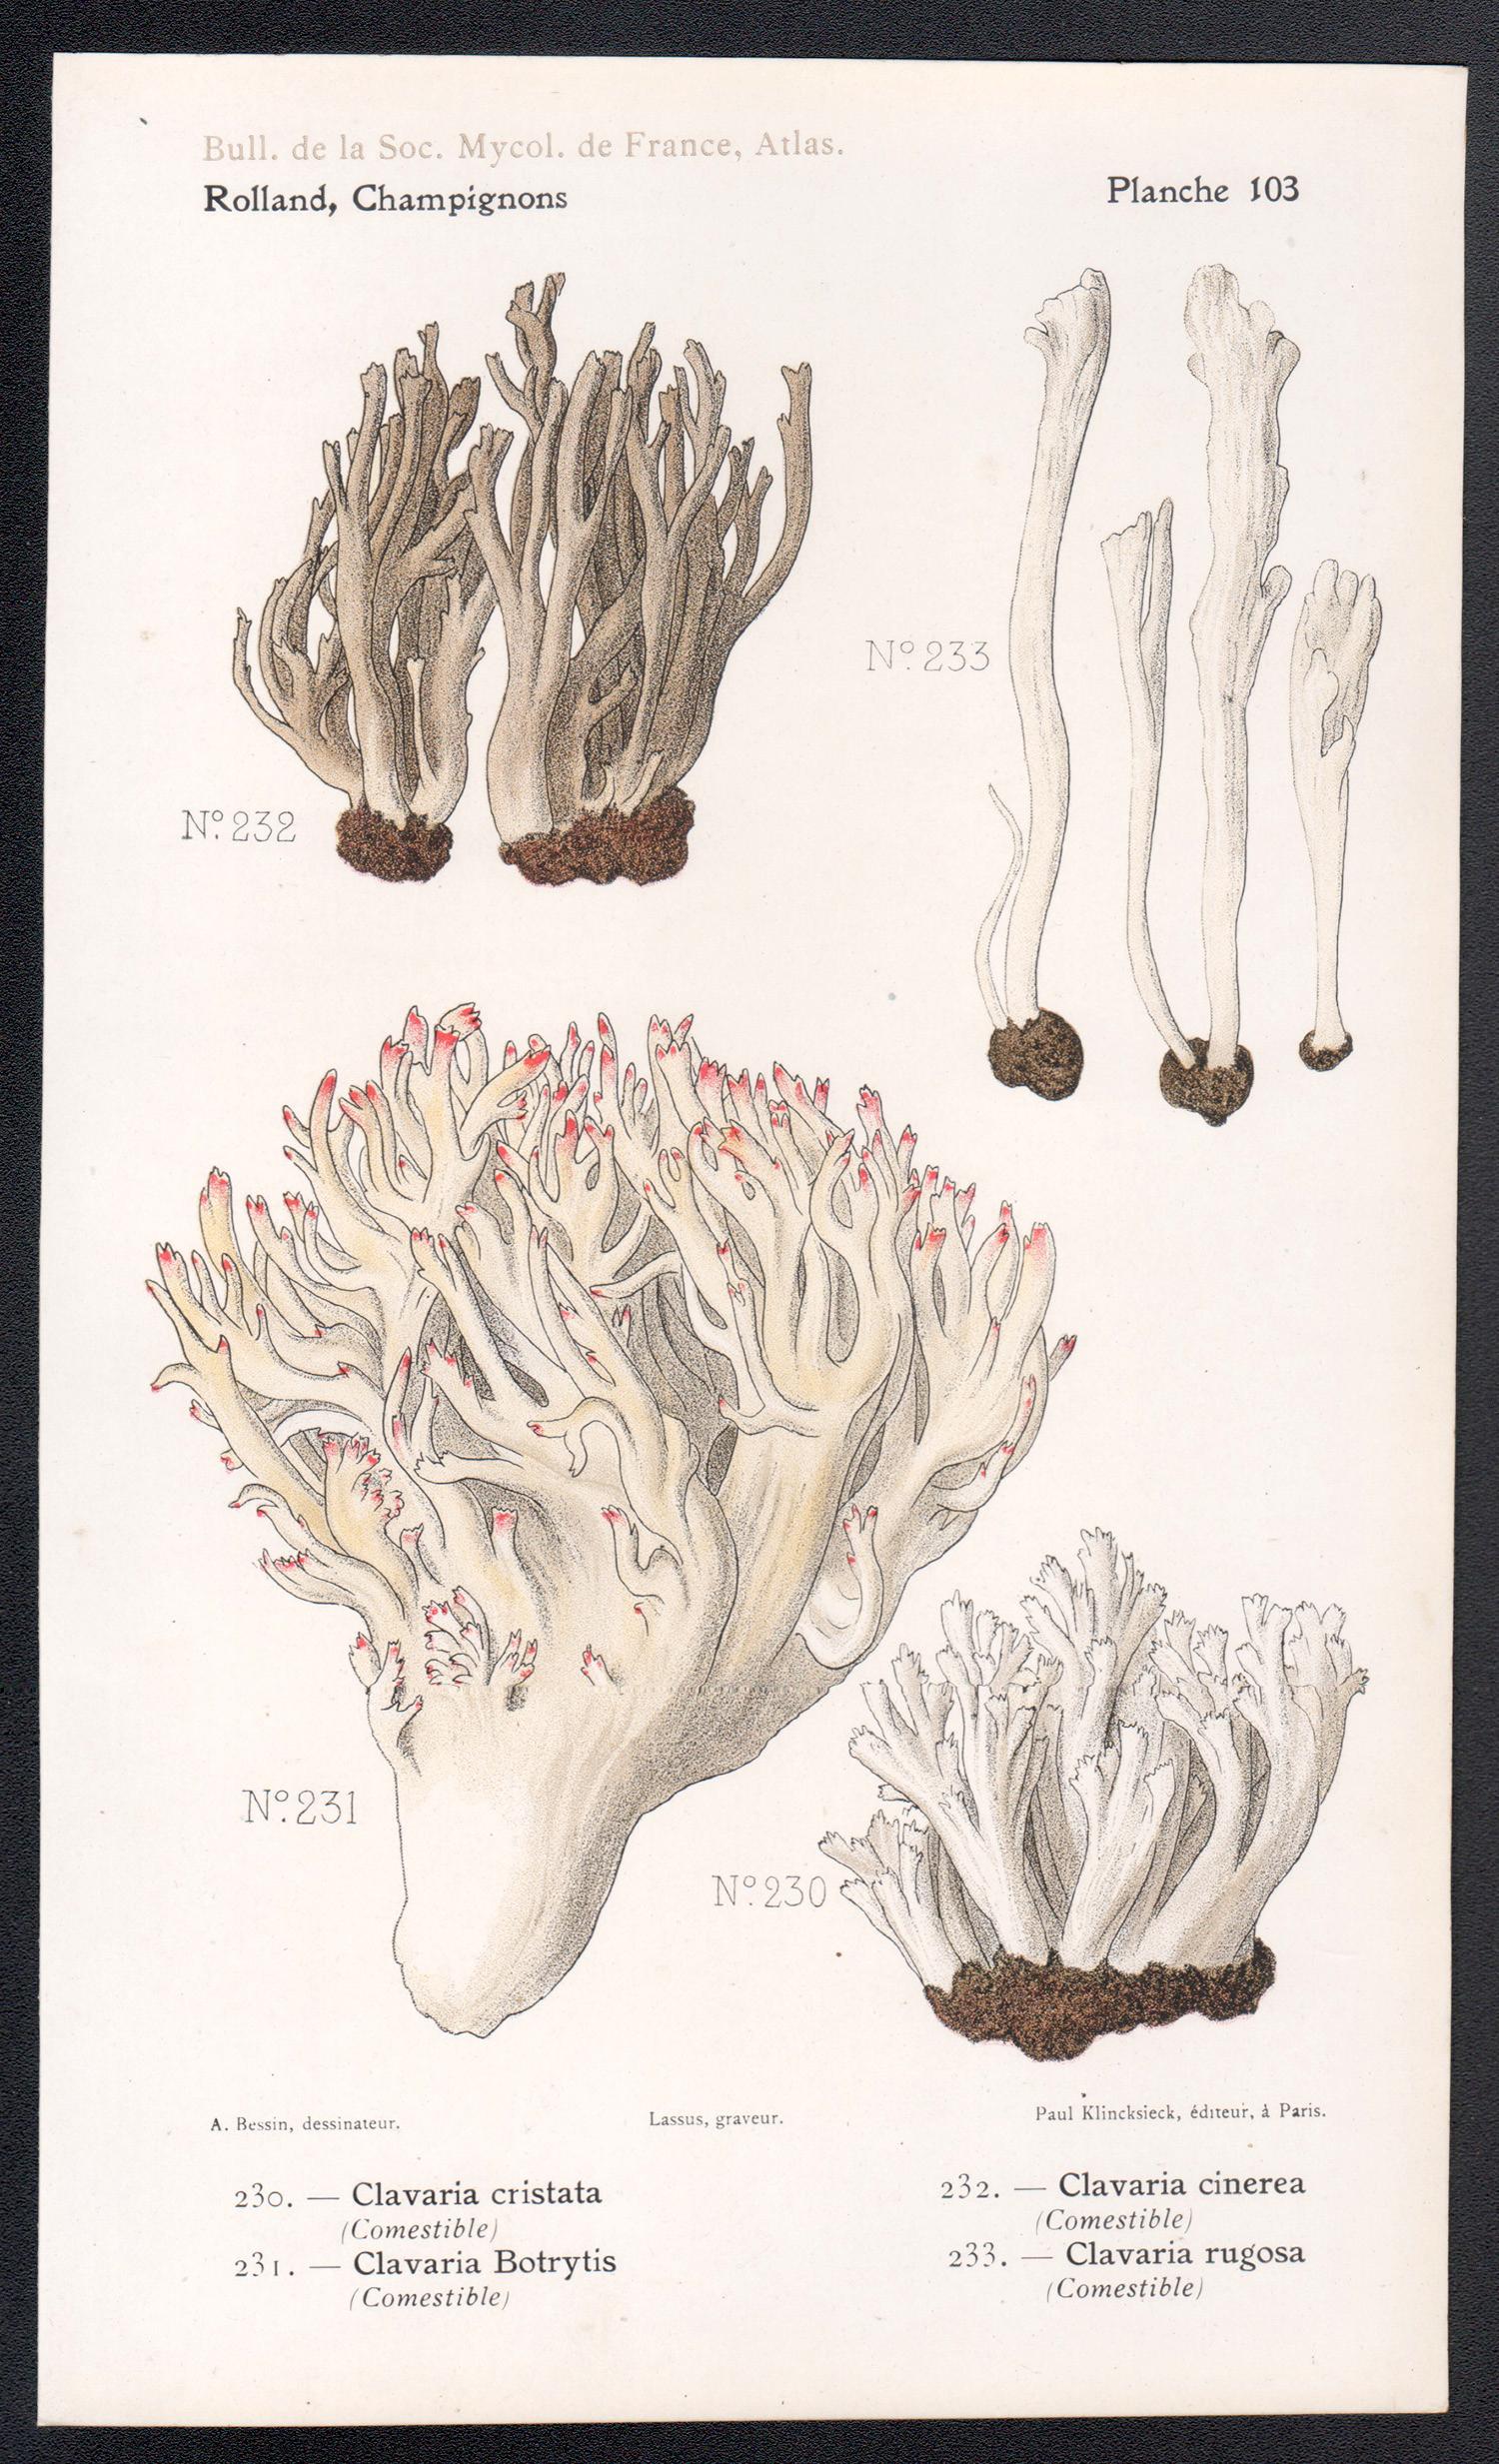 Champignons, French antique mushroom fungi chromolithograph, 1910 - Print by Lassus after Aimé Bessin